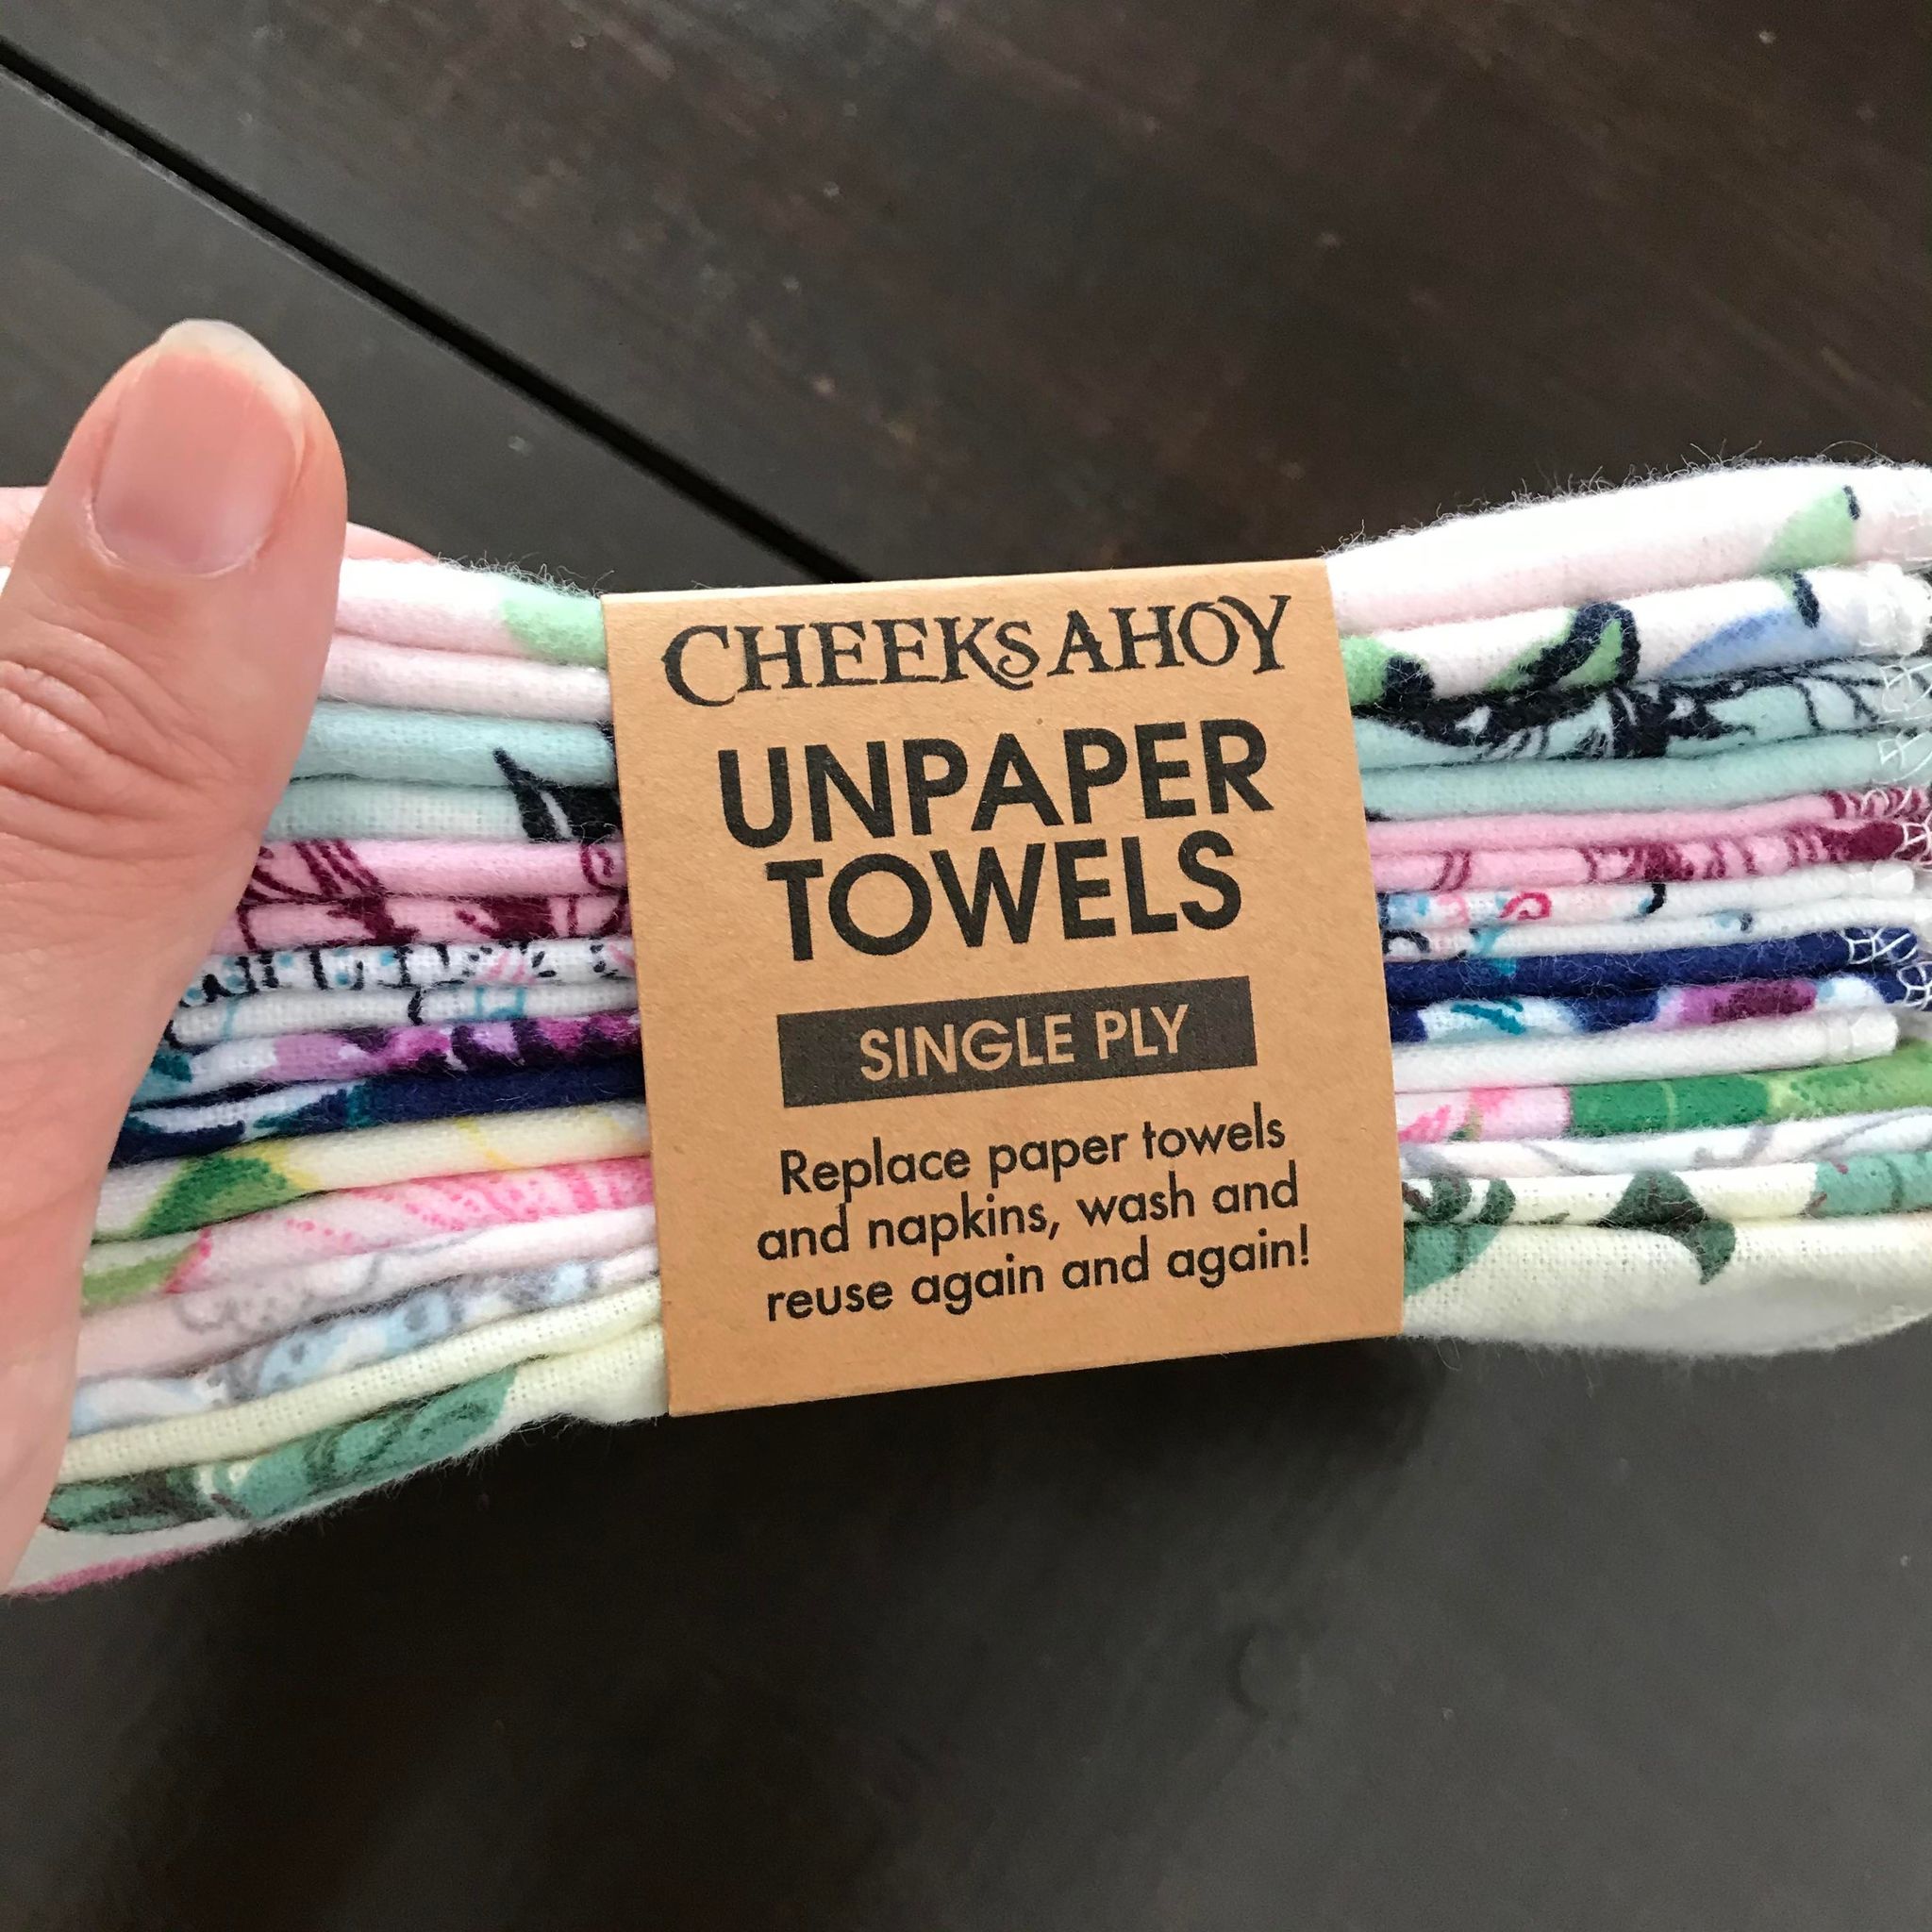 Set of 8 single ply cotton Unpaper Towels in floral patterns handmade in Canada by Cheeks Ahoy replace paper towels and napkins, wash and reuse again and again